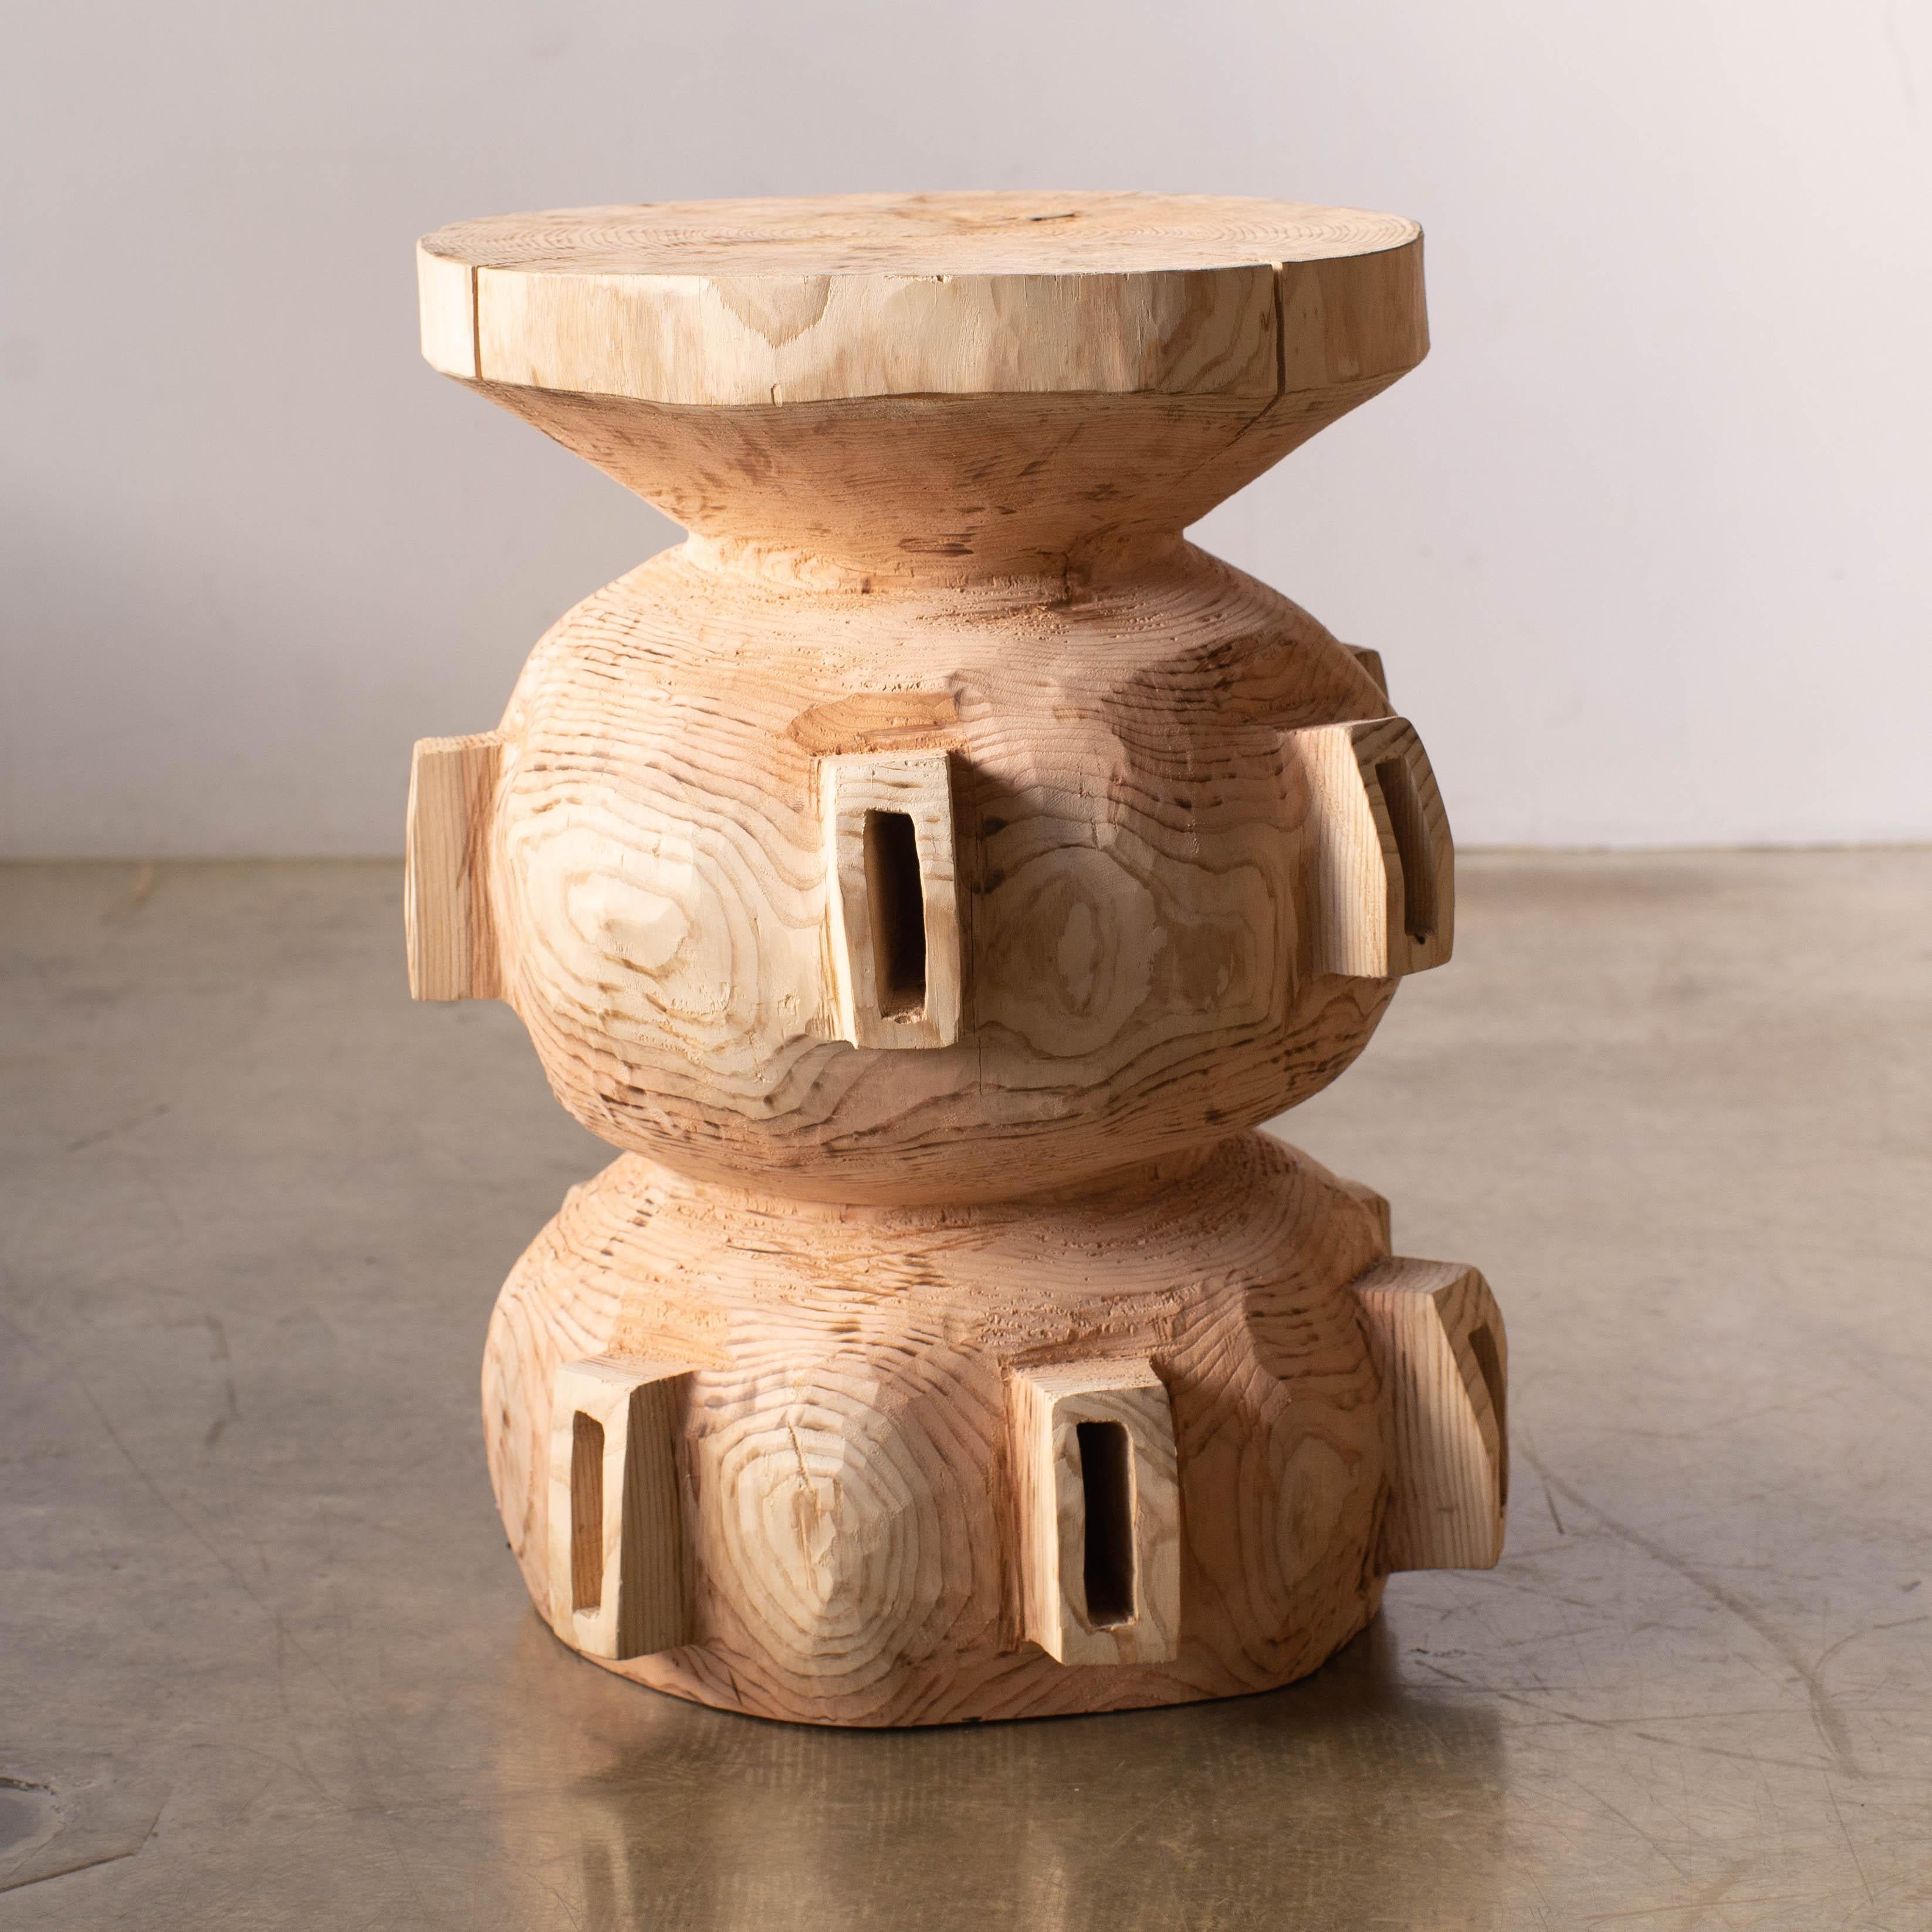 Name: Spaceship mam
Sculptural stool by Hiroyuki Nishimura and zone carved furniture
Material: Cedar
This work is carved from log with some kinds of chainsaws.
Most of wood used for Nishimura's works are unable to use anything, these woods are